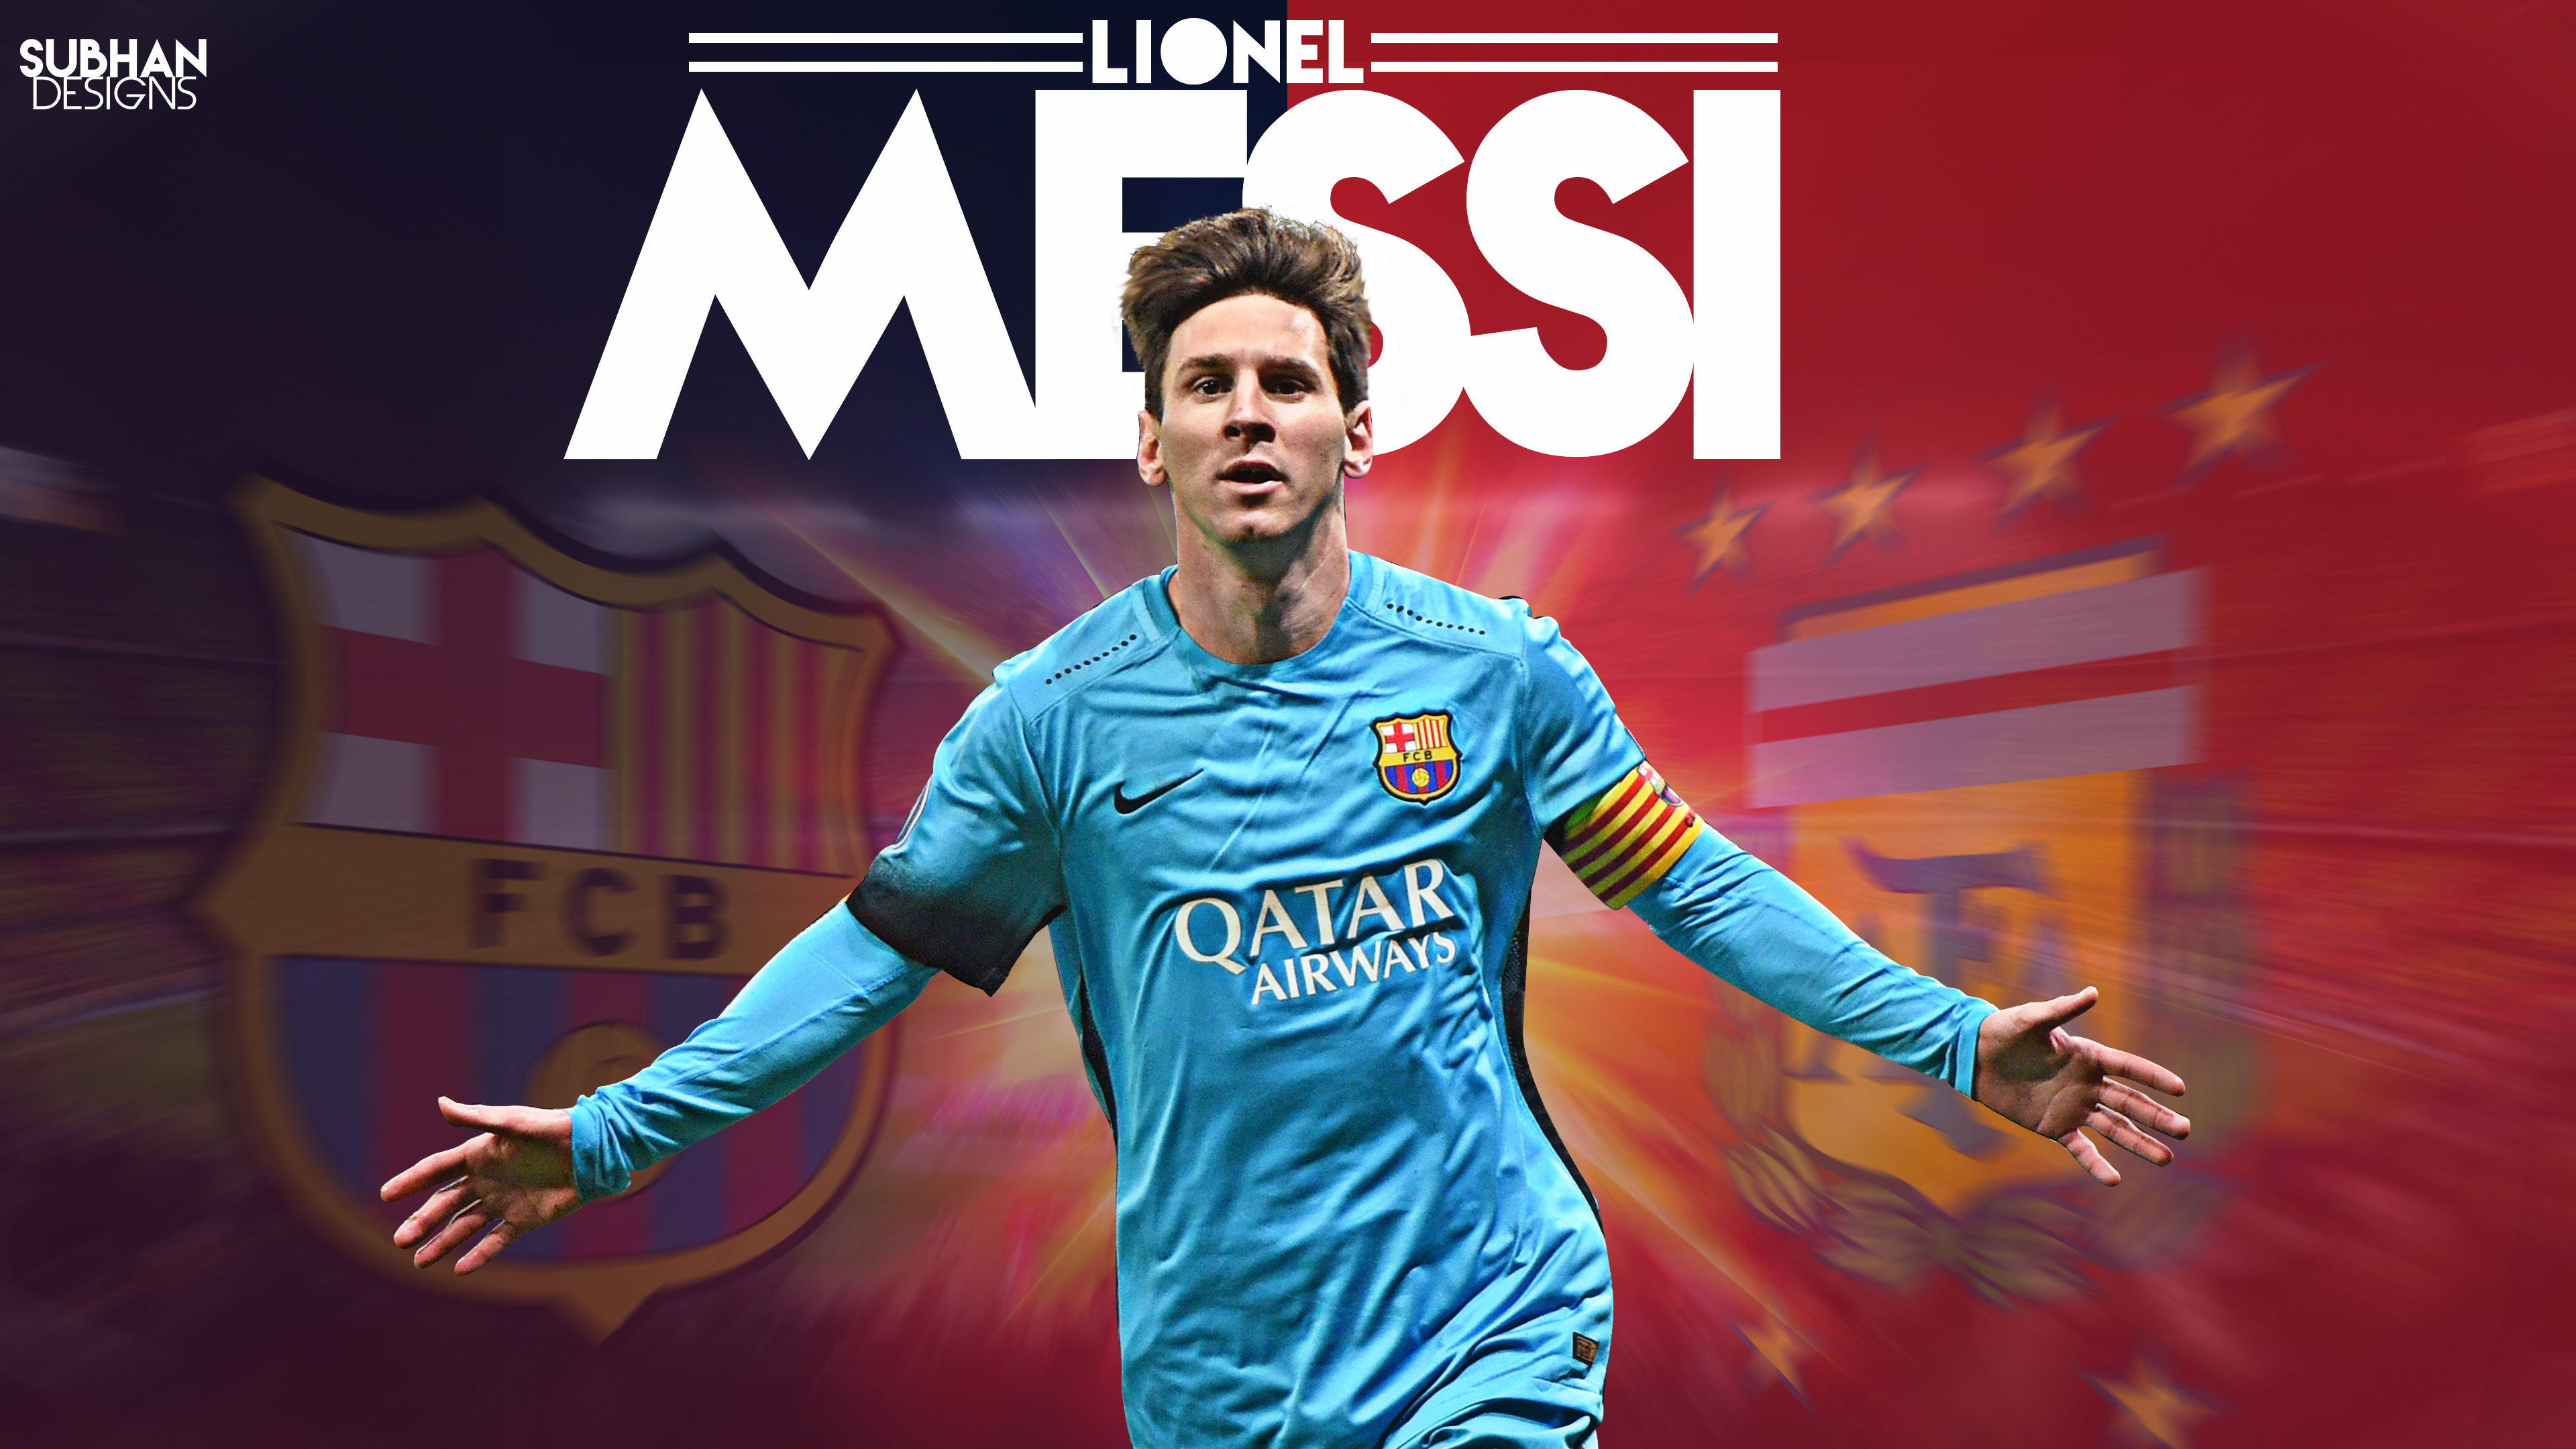 Lionel Messi Wallpaper 4k By Subhan22